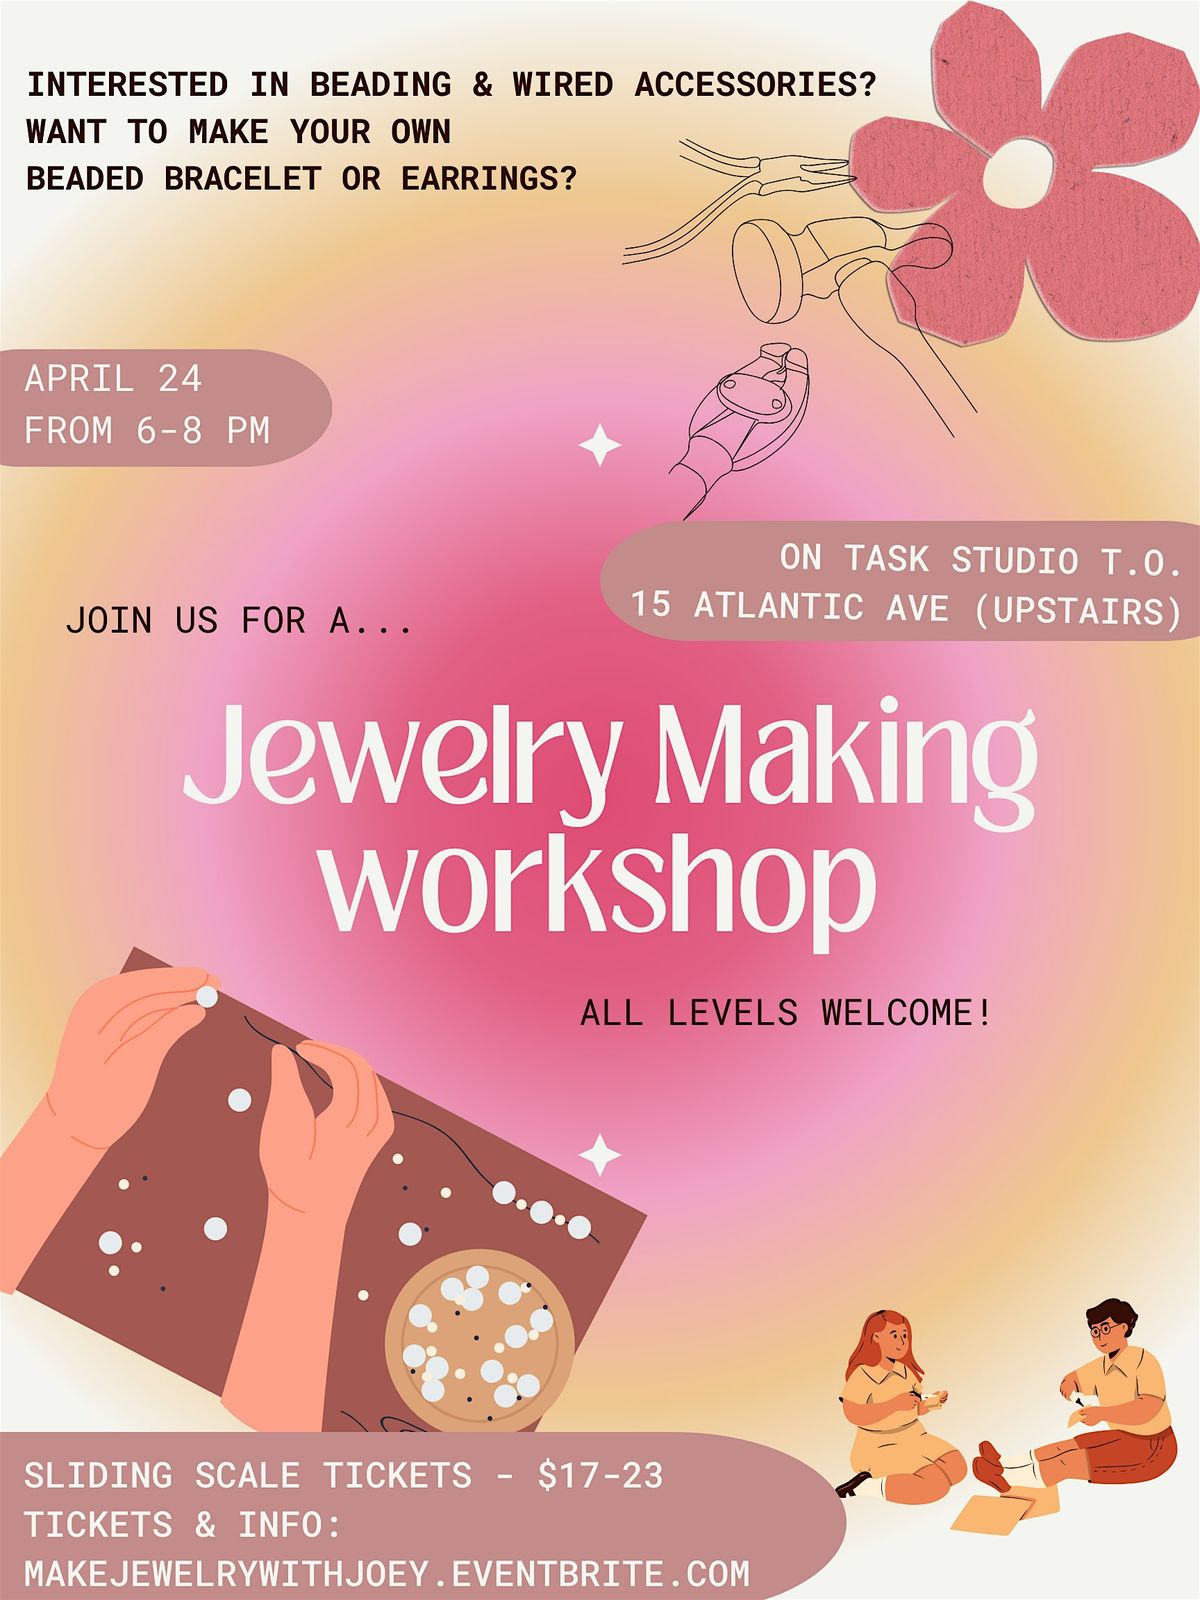 Jewelry Making Workshop led by Joey V!